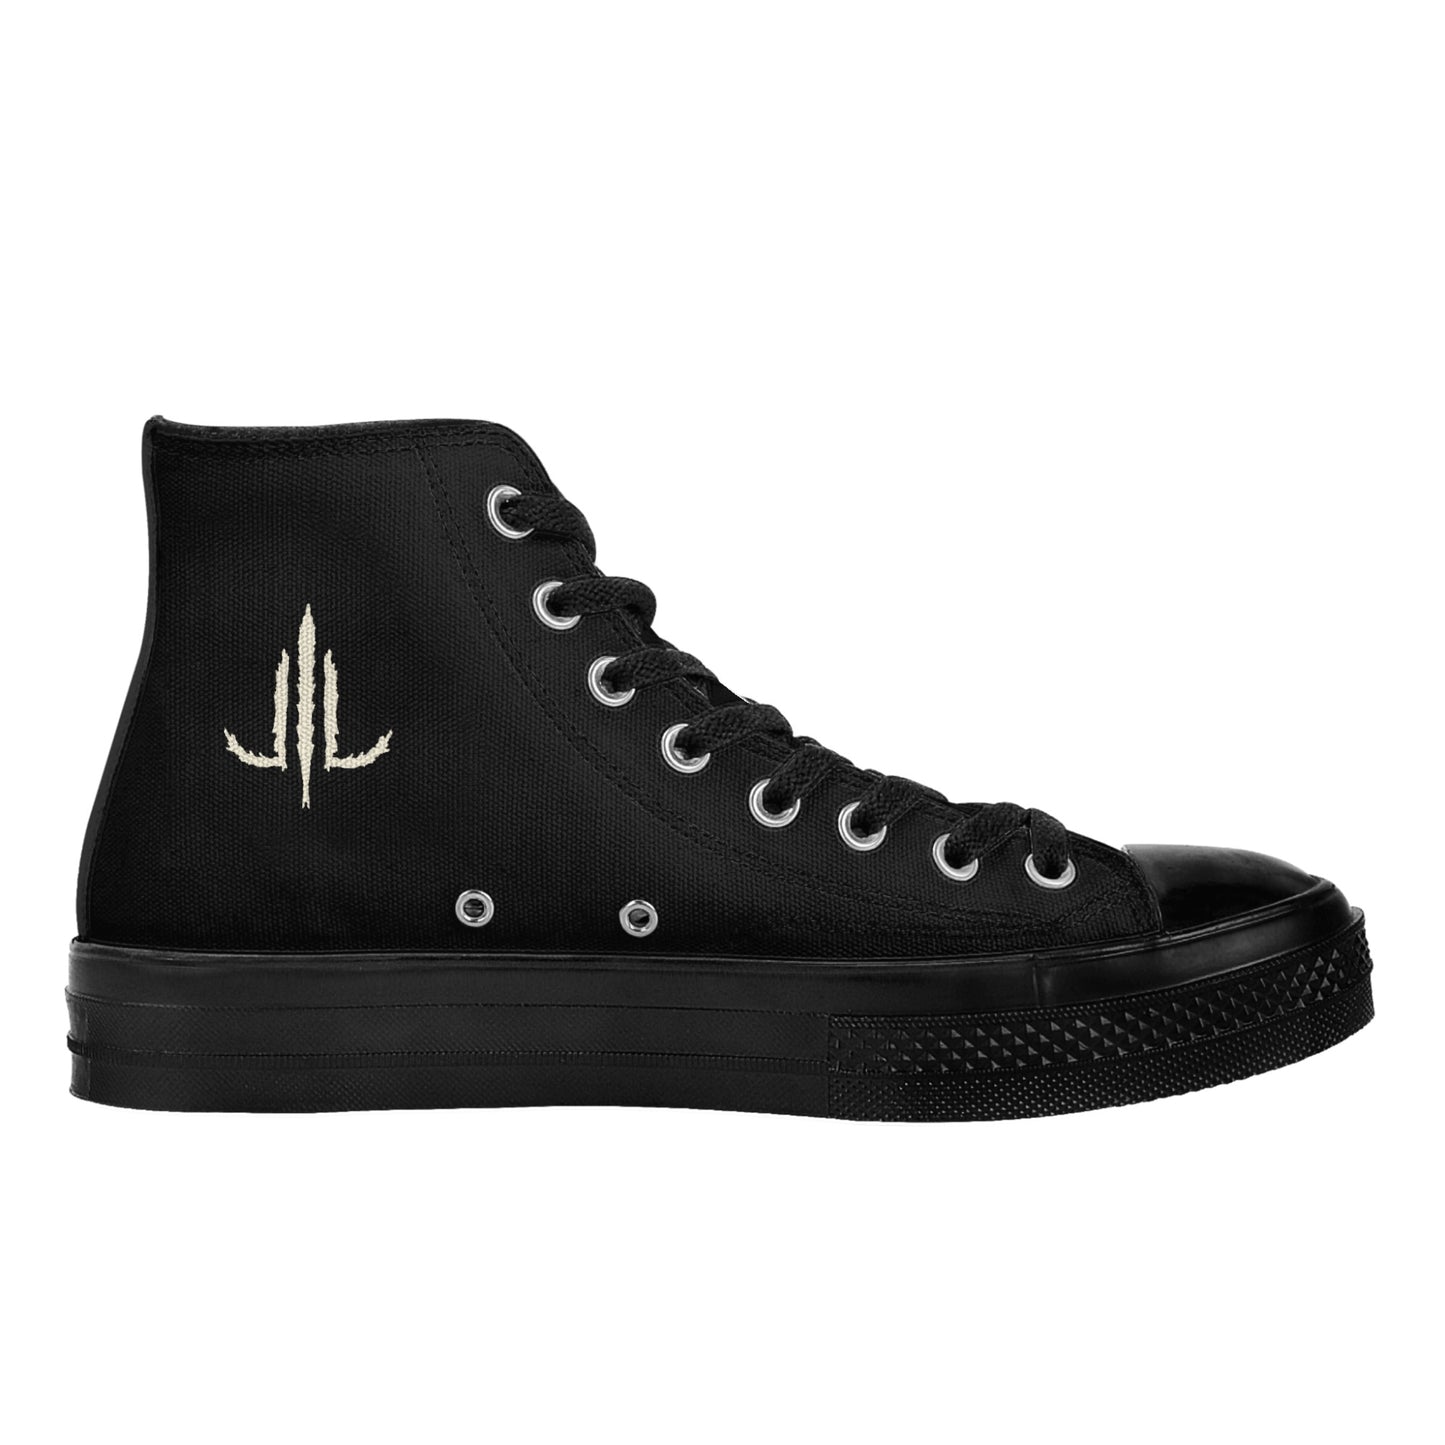 Traditional Spider High Top Canvas Shoes